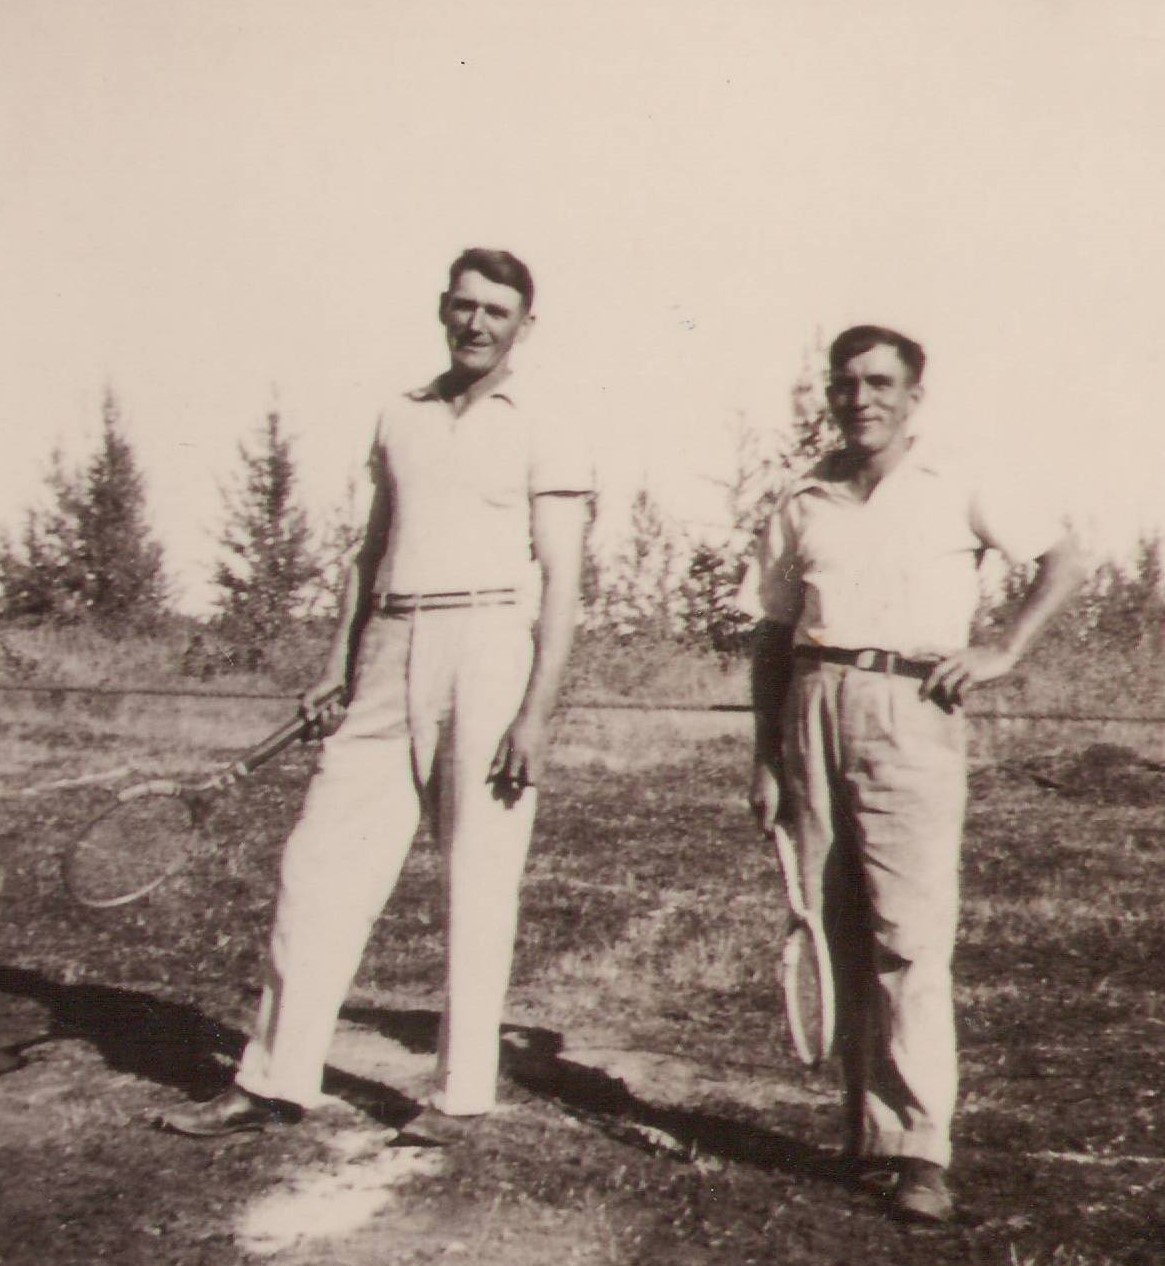 We know the gentleman on the left is Karl Haessel but are not sure who his tennis teammate is. Tennis was a popular sport amongst a few community members with Karl building a court (as seen in photo) and a court constructed at the Old Bay House. The two men also look very similar - leading us to believe they might be a father son team, but we are unsure of the fathers name! If you know any further information we would love to hear it!
990.4.42.6 / Hassel, Karl